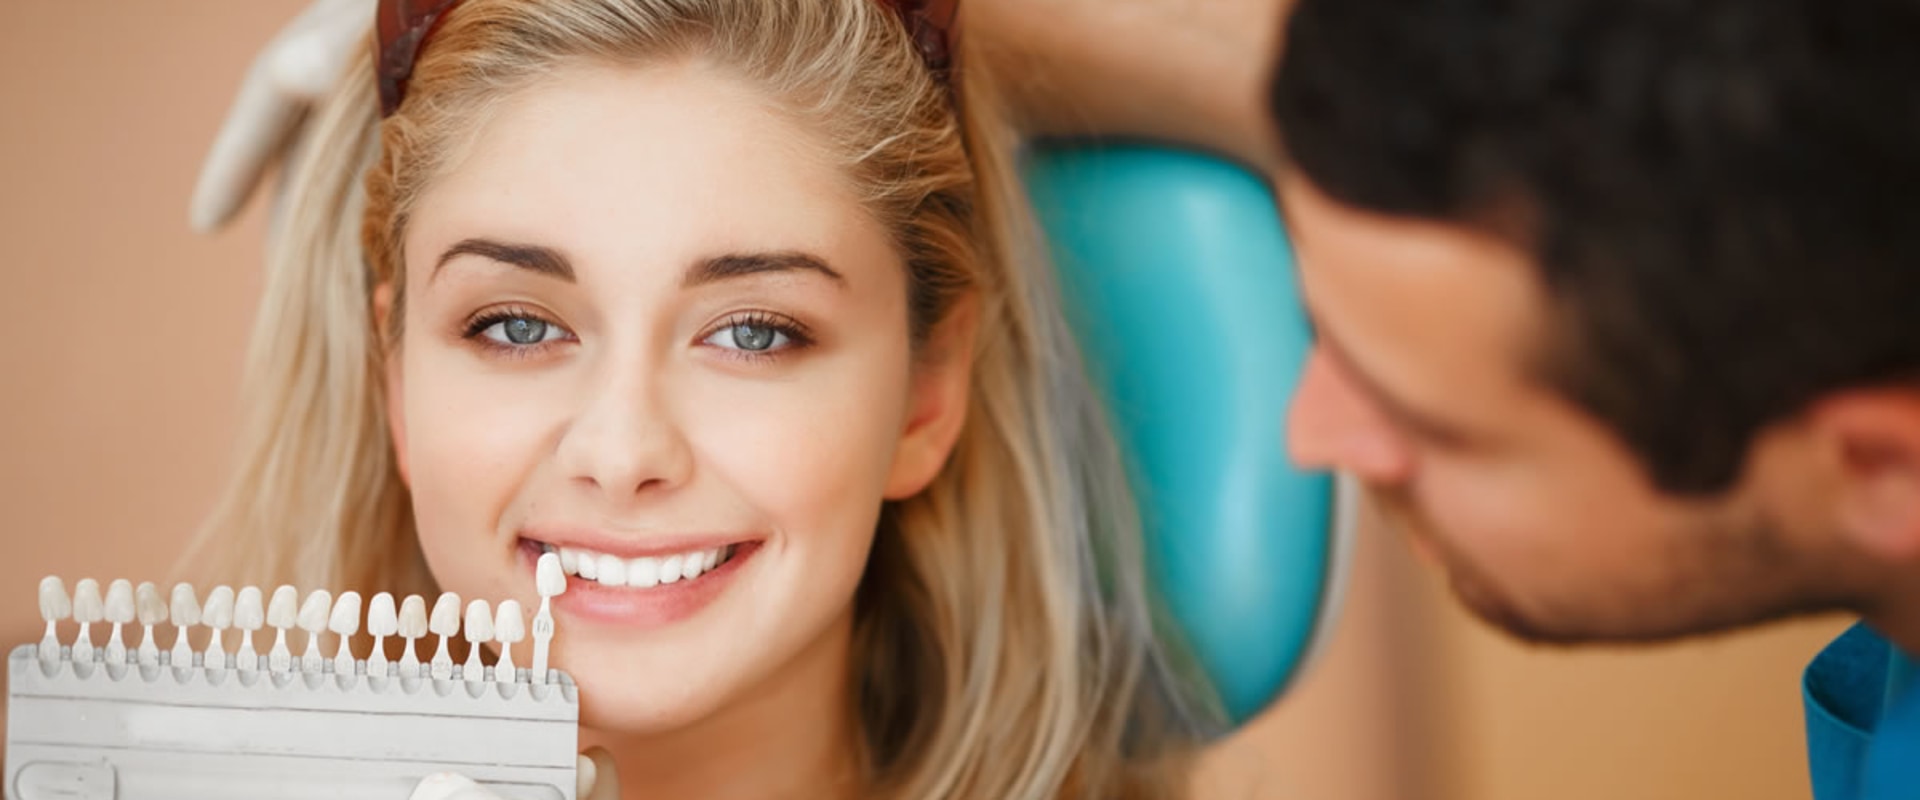 The Difference Between Aesthetic and Cosmetic Dentistry